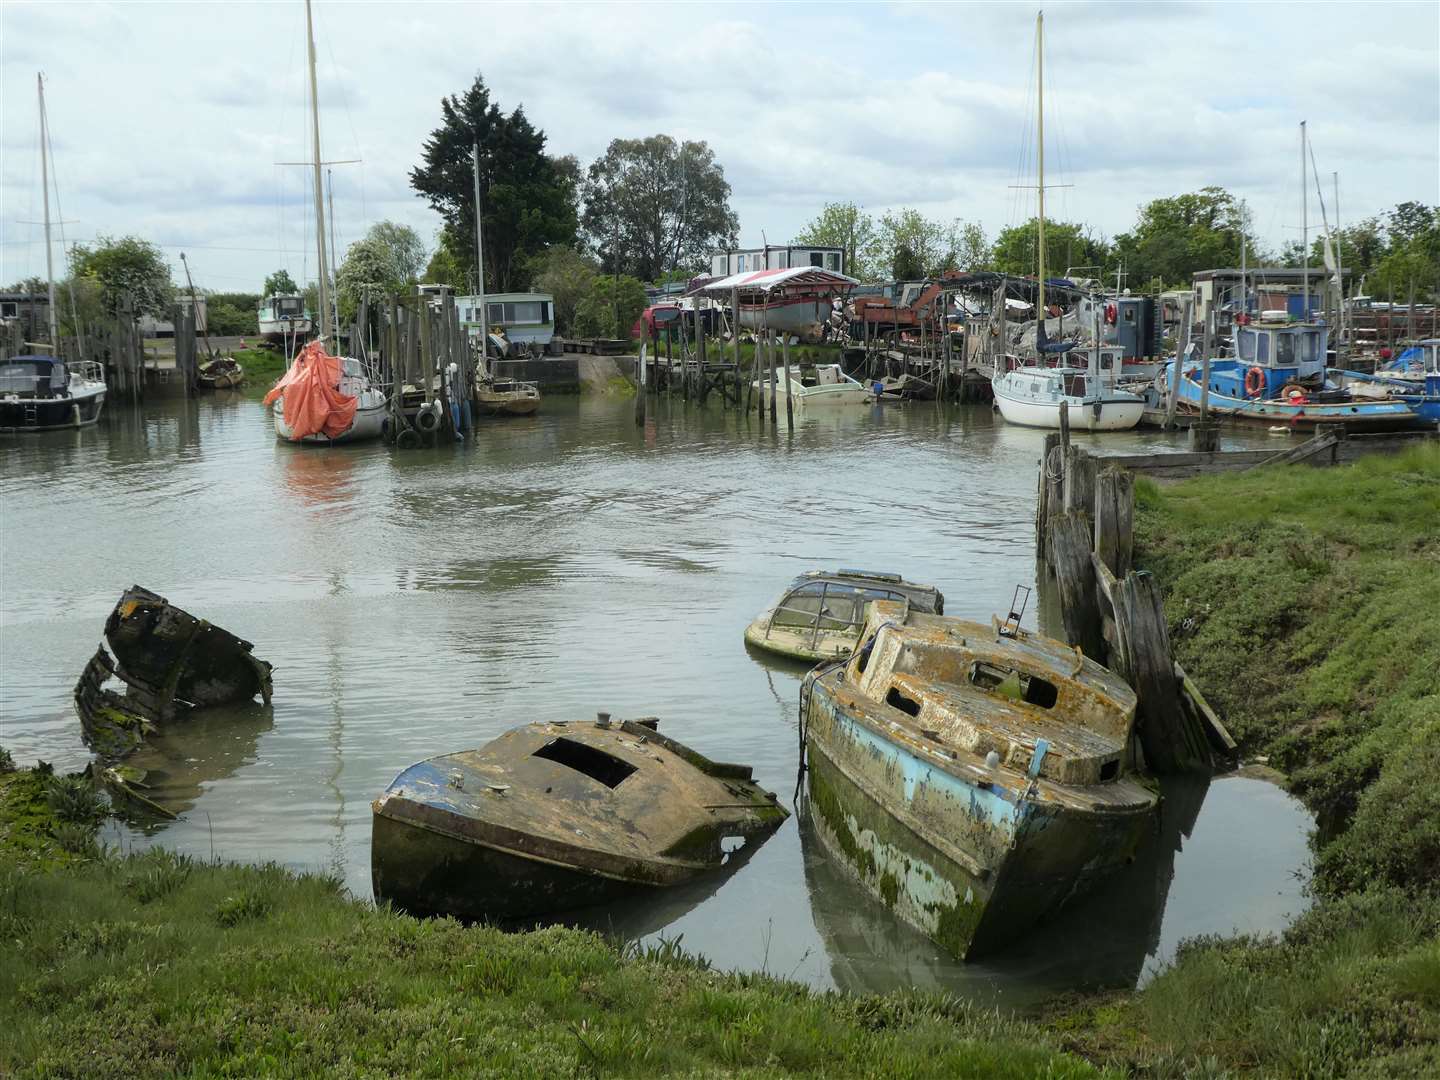 Some ancient vessels at Oare boatyard, slowly sinking into the creek. Pic: Michaela Sharpe